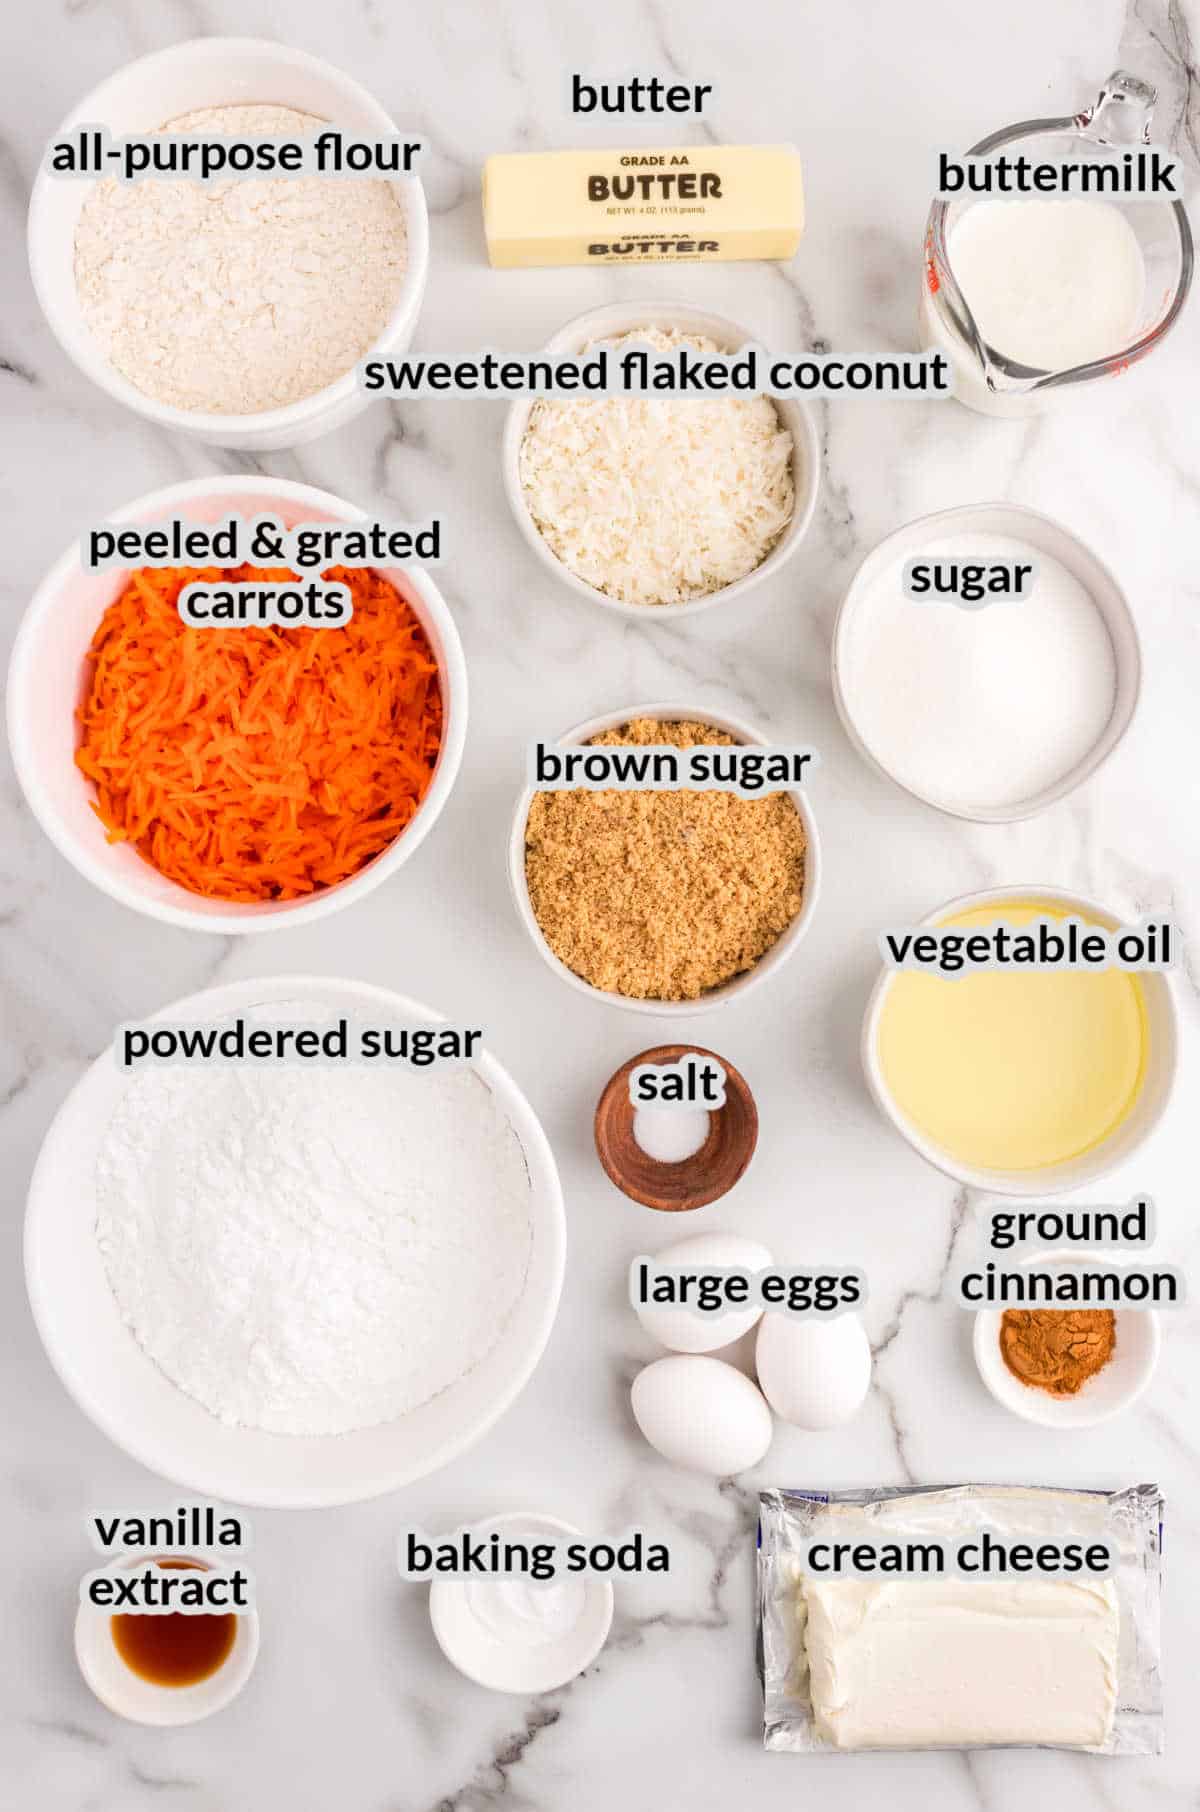 Overhead Image of Carrot Cake Ingredients